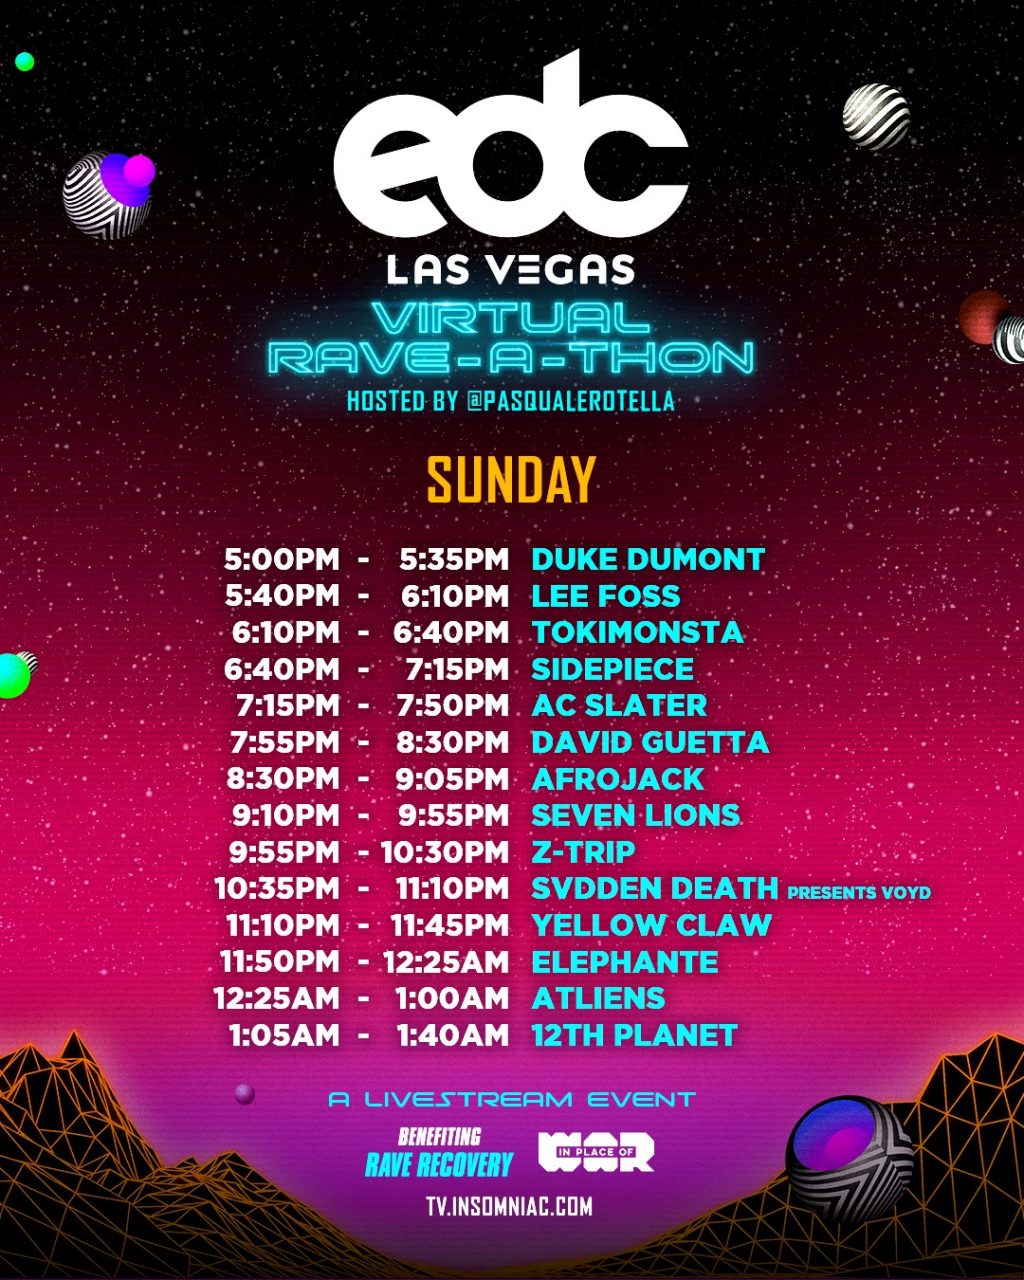 Plan your weekend with the EDC Las Vegas Virtual Rave a Thon schedule